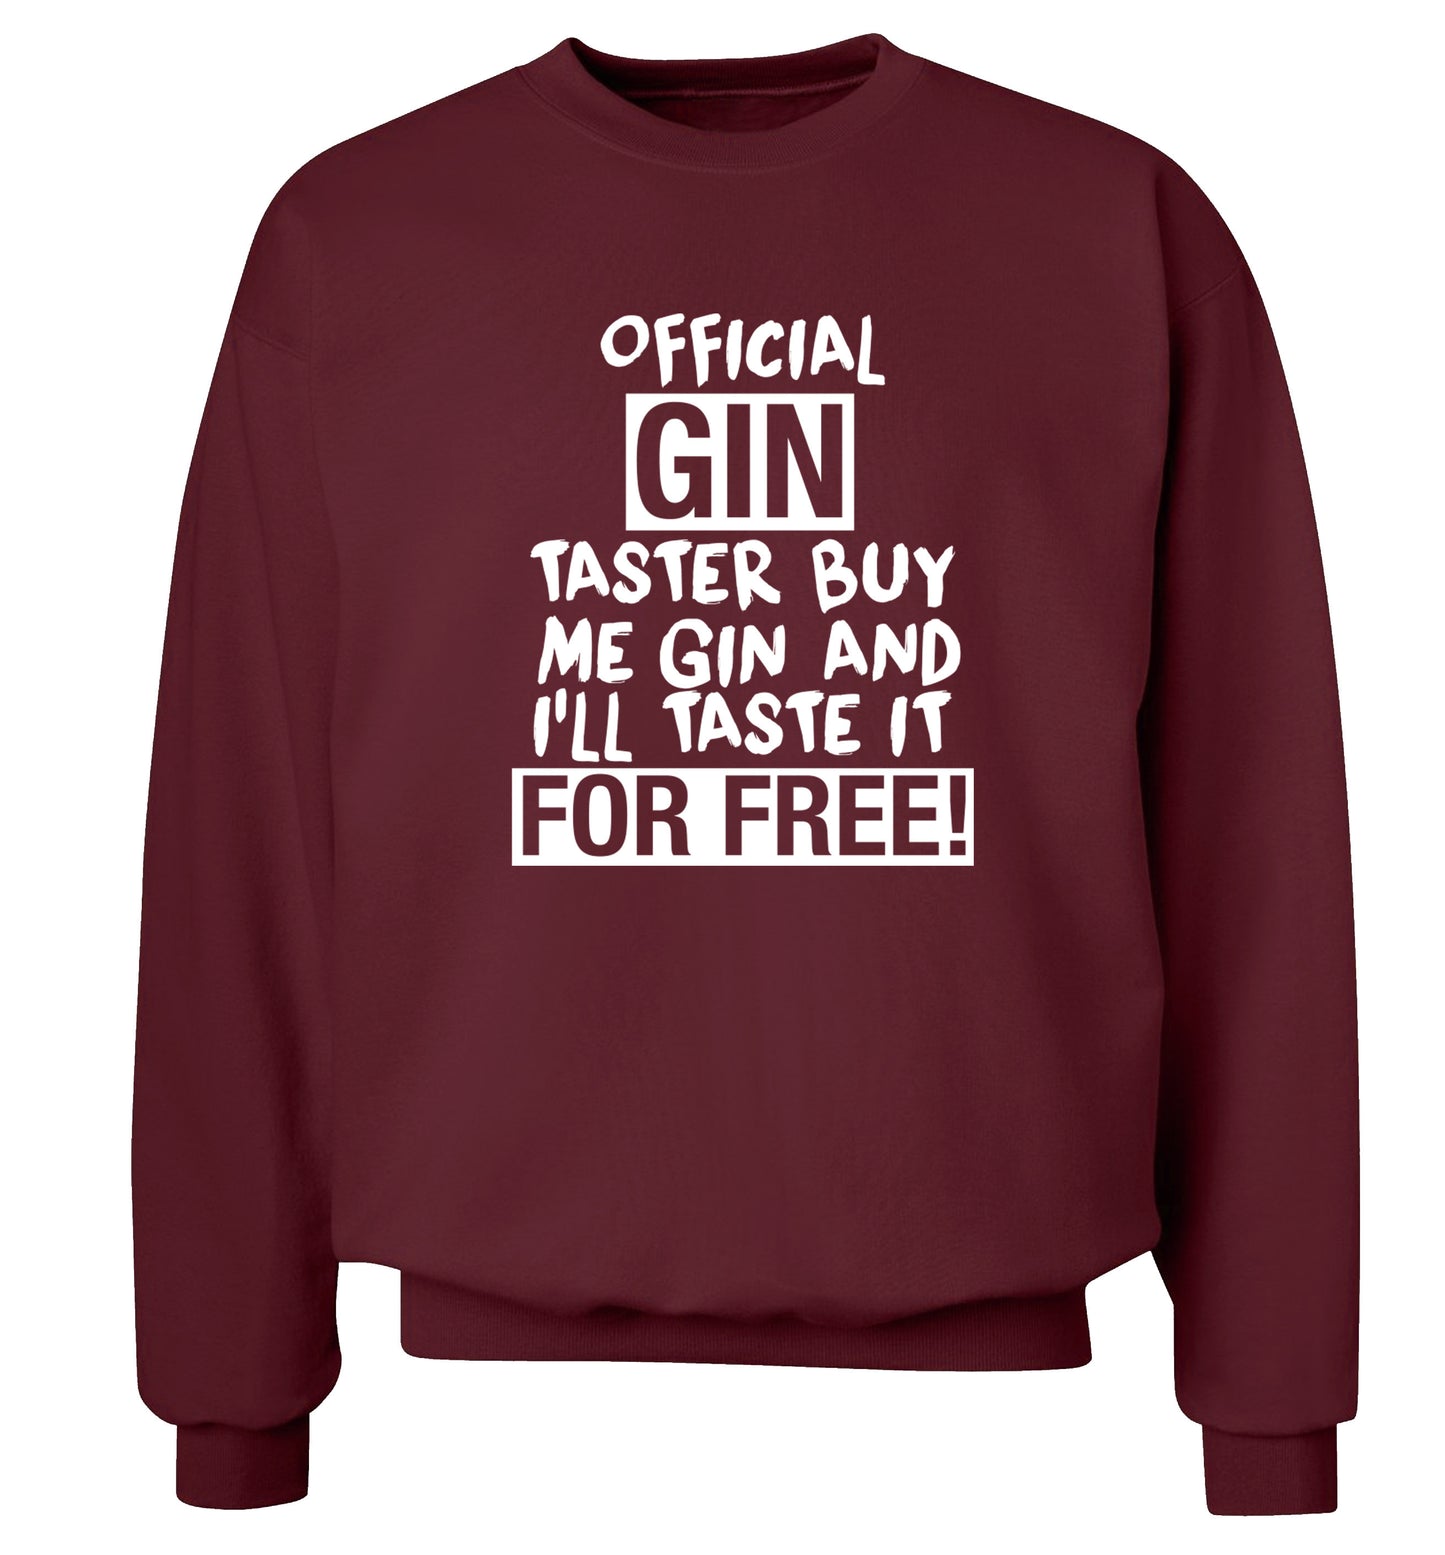 Official gin taster buy me gin and I'll taste it for free Adult's unisex maroon Sweater 2XL